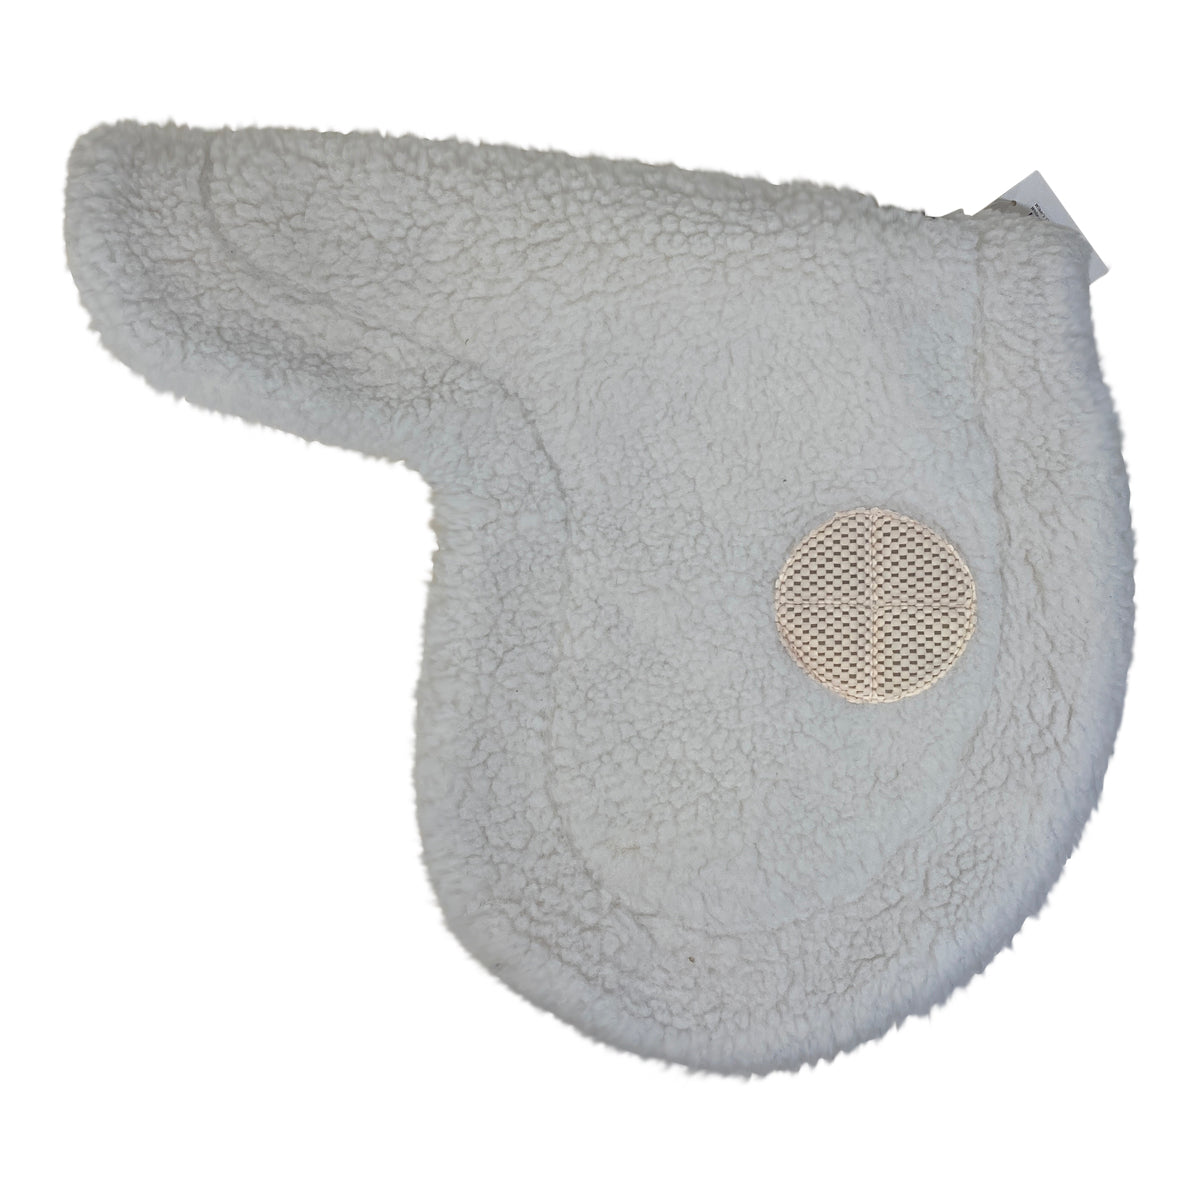 Wilker's 'Cling-On' Fleece Saddle Pad in White